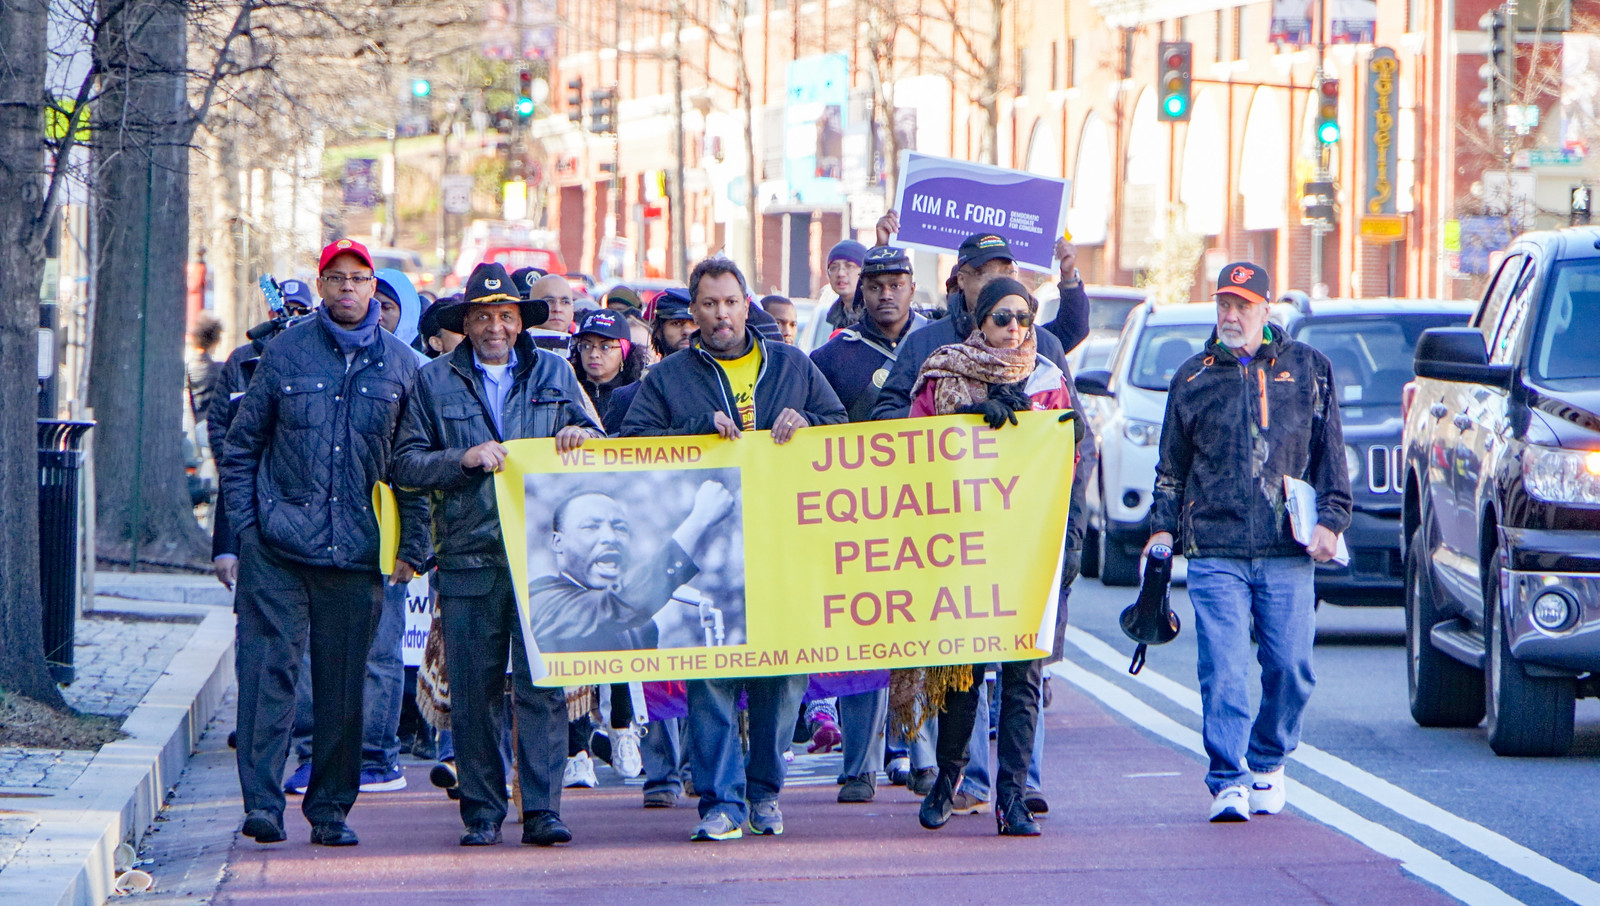 2018.04.04 The Peopleâ€™s March for Justice, Equity and Peace, Washington, DC USA 01176